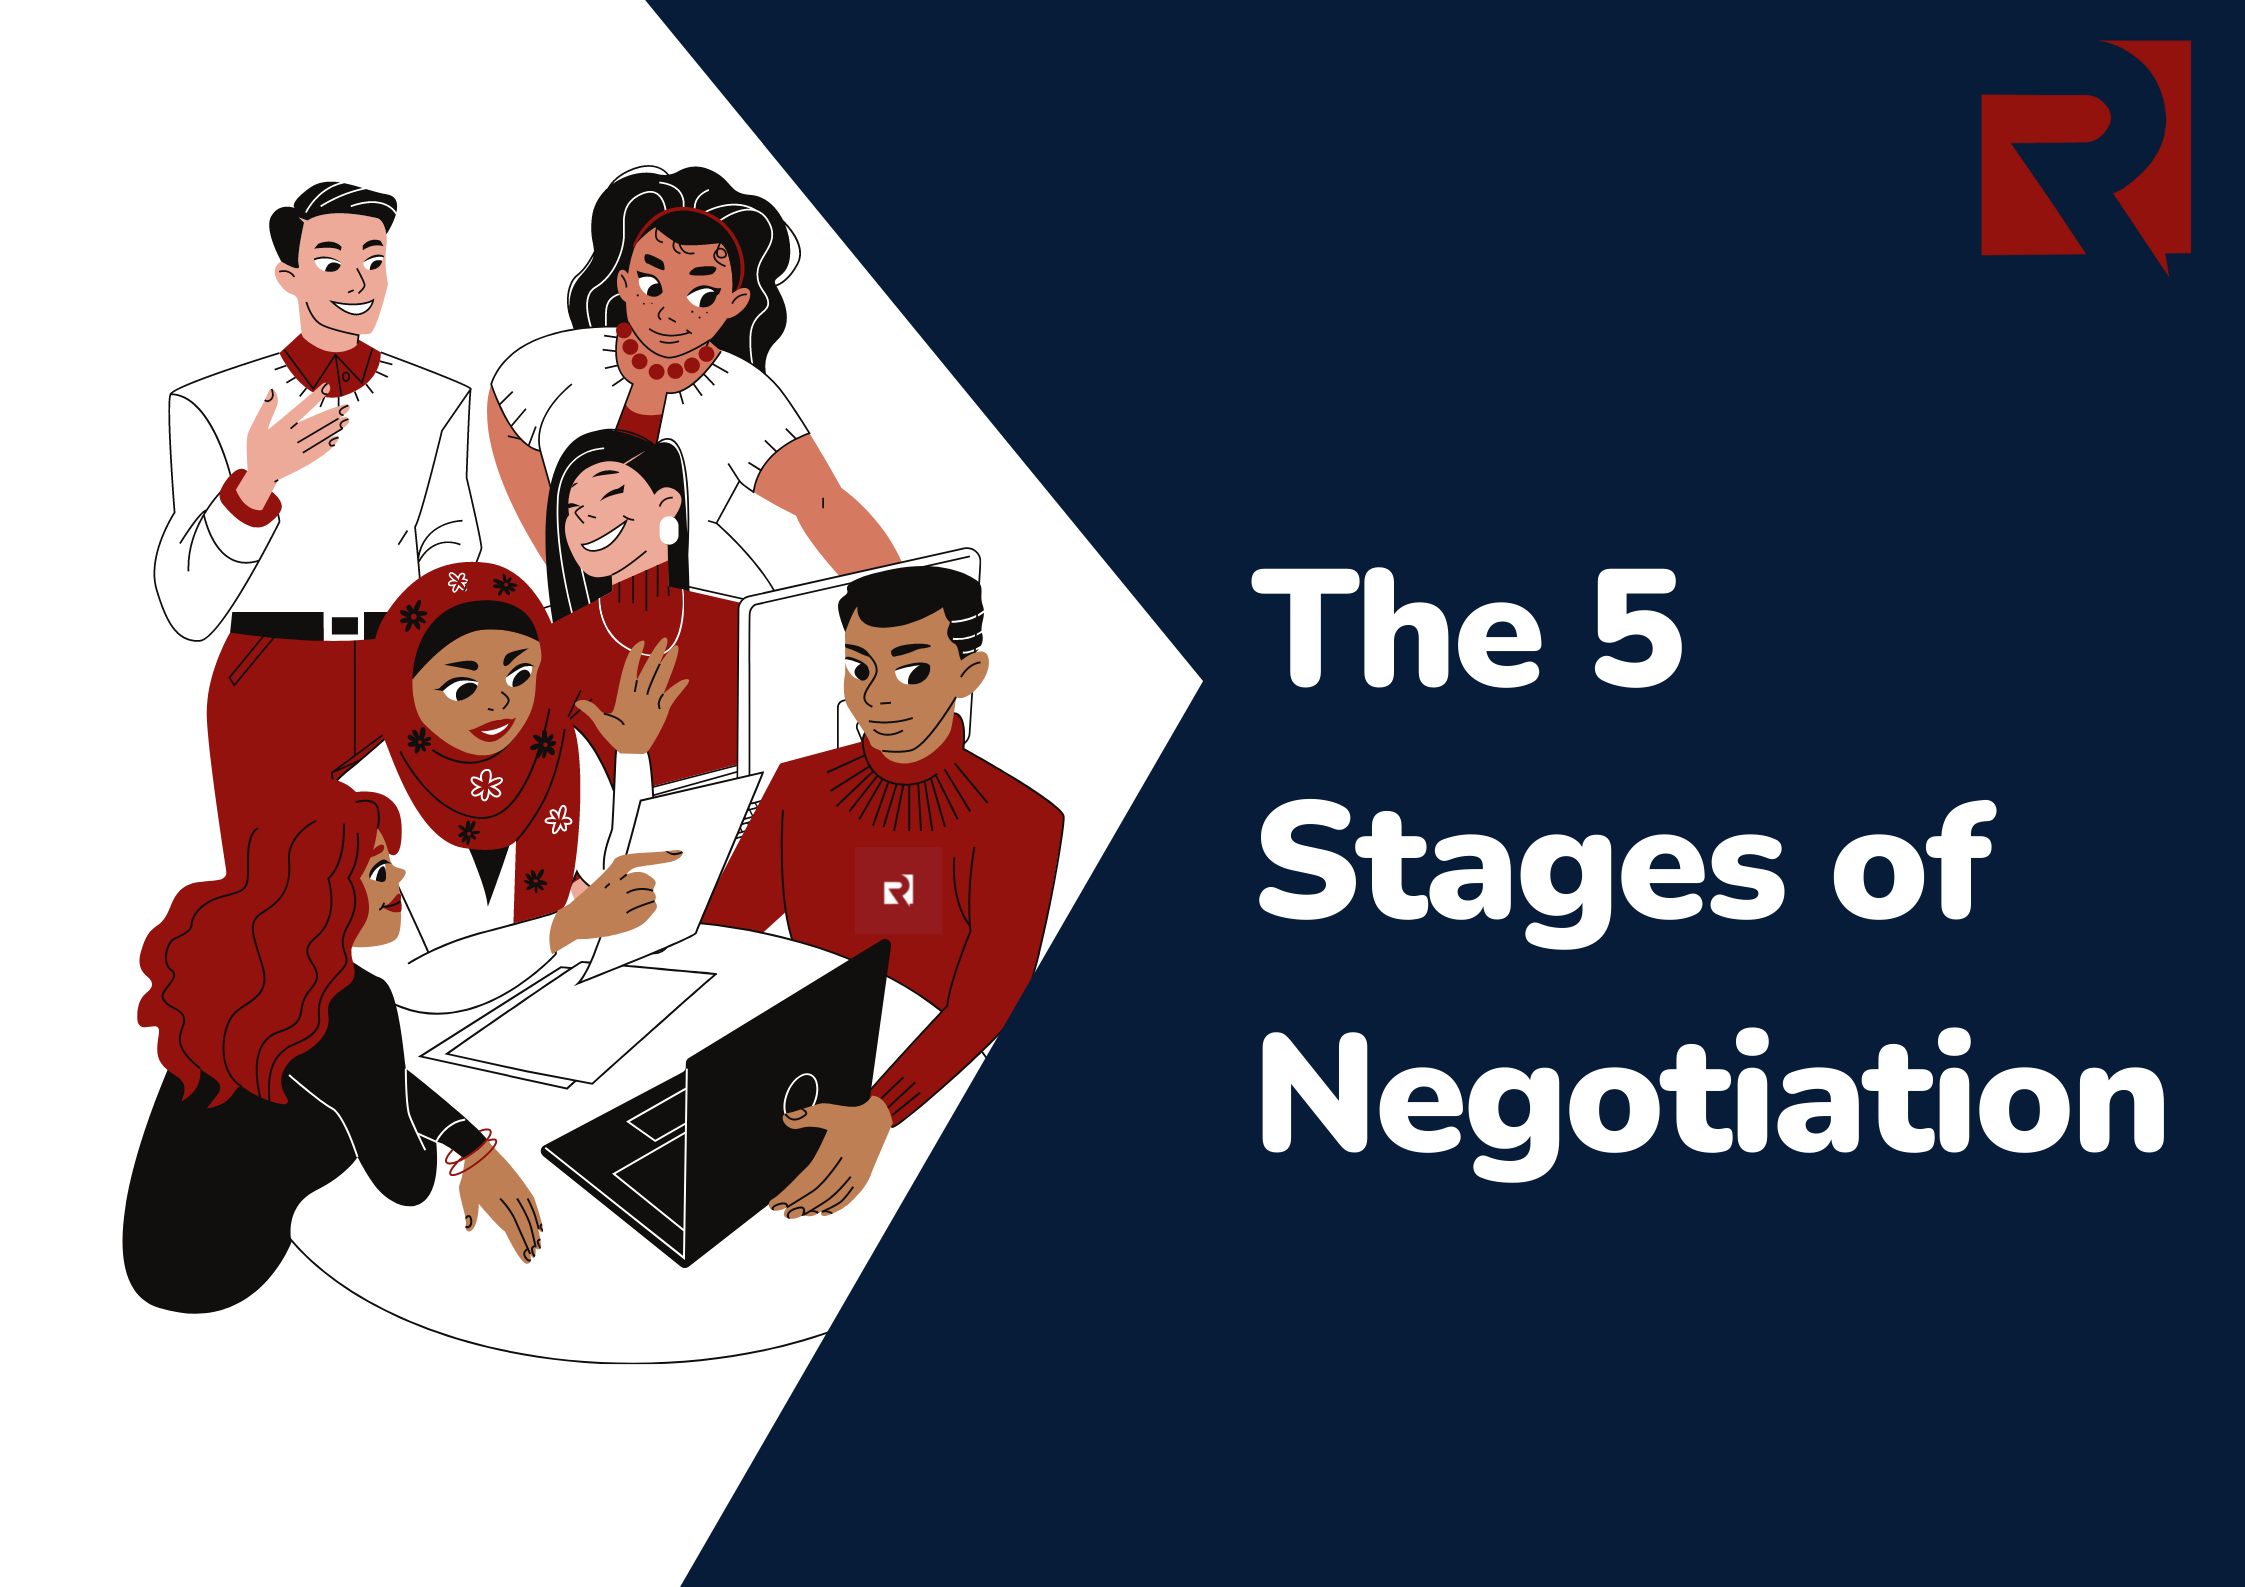 The 5 Stages of Negotiation